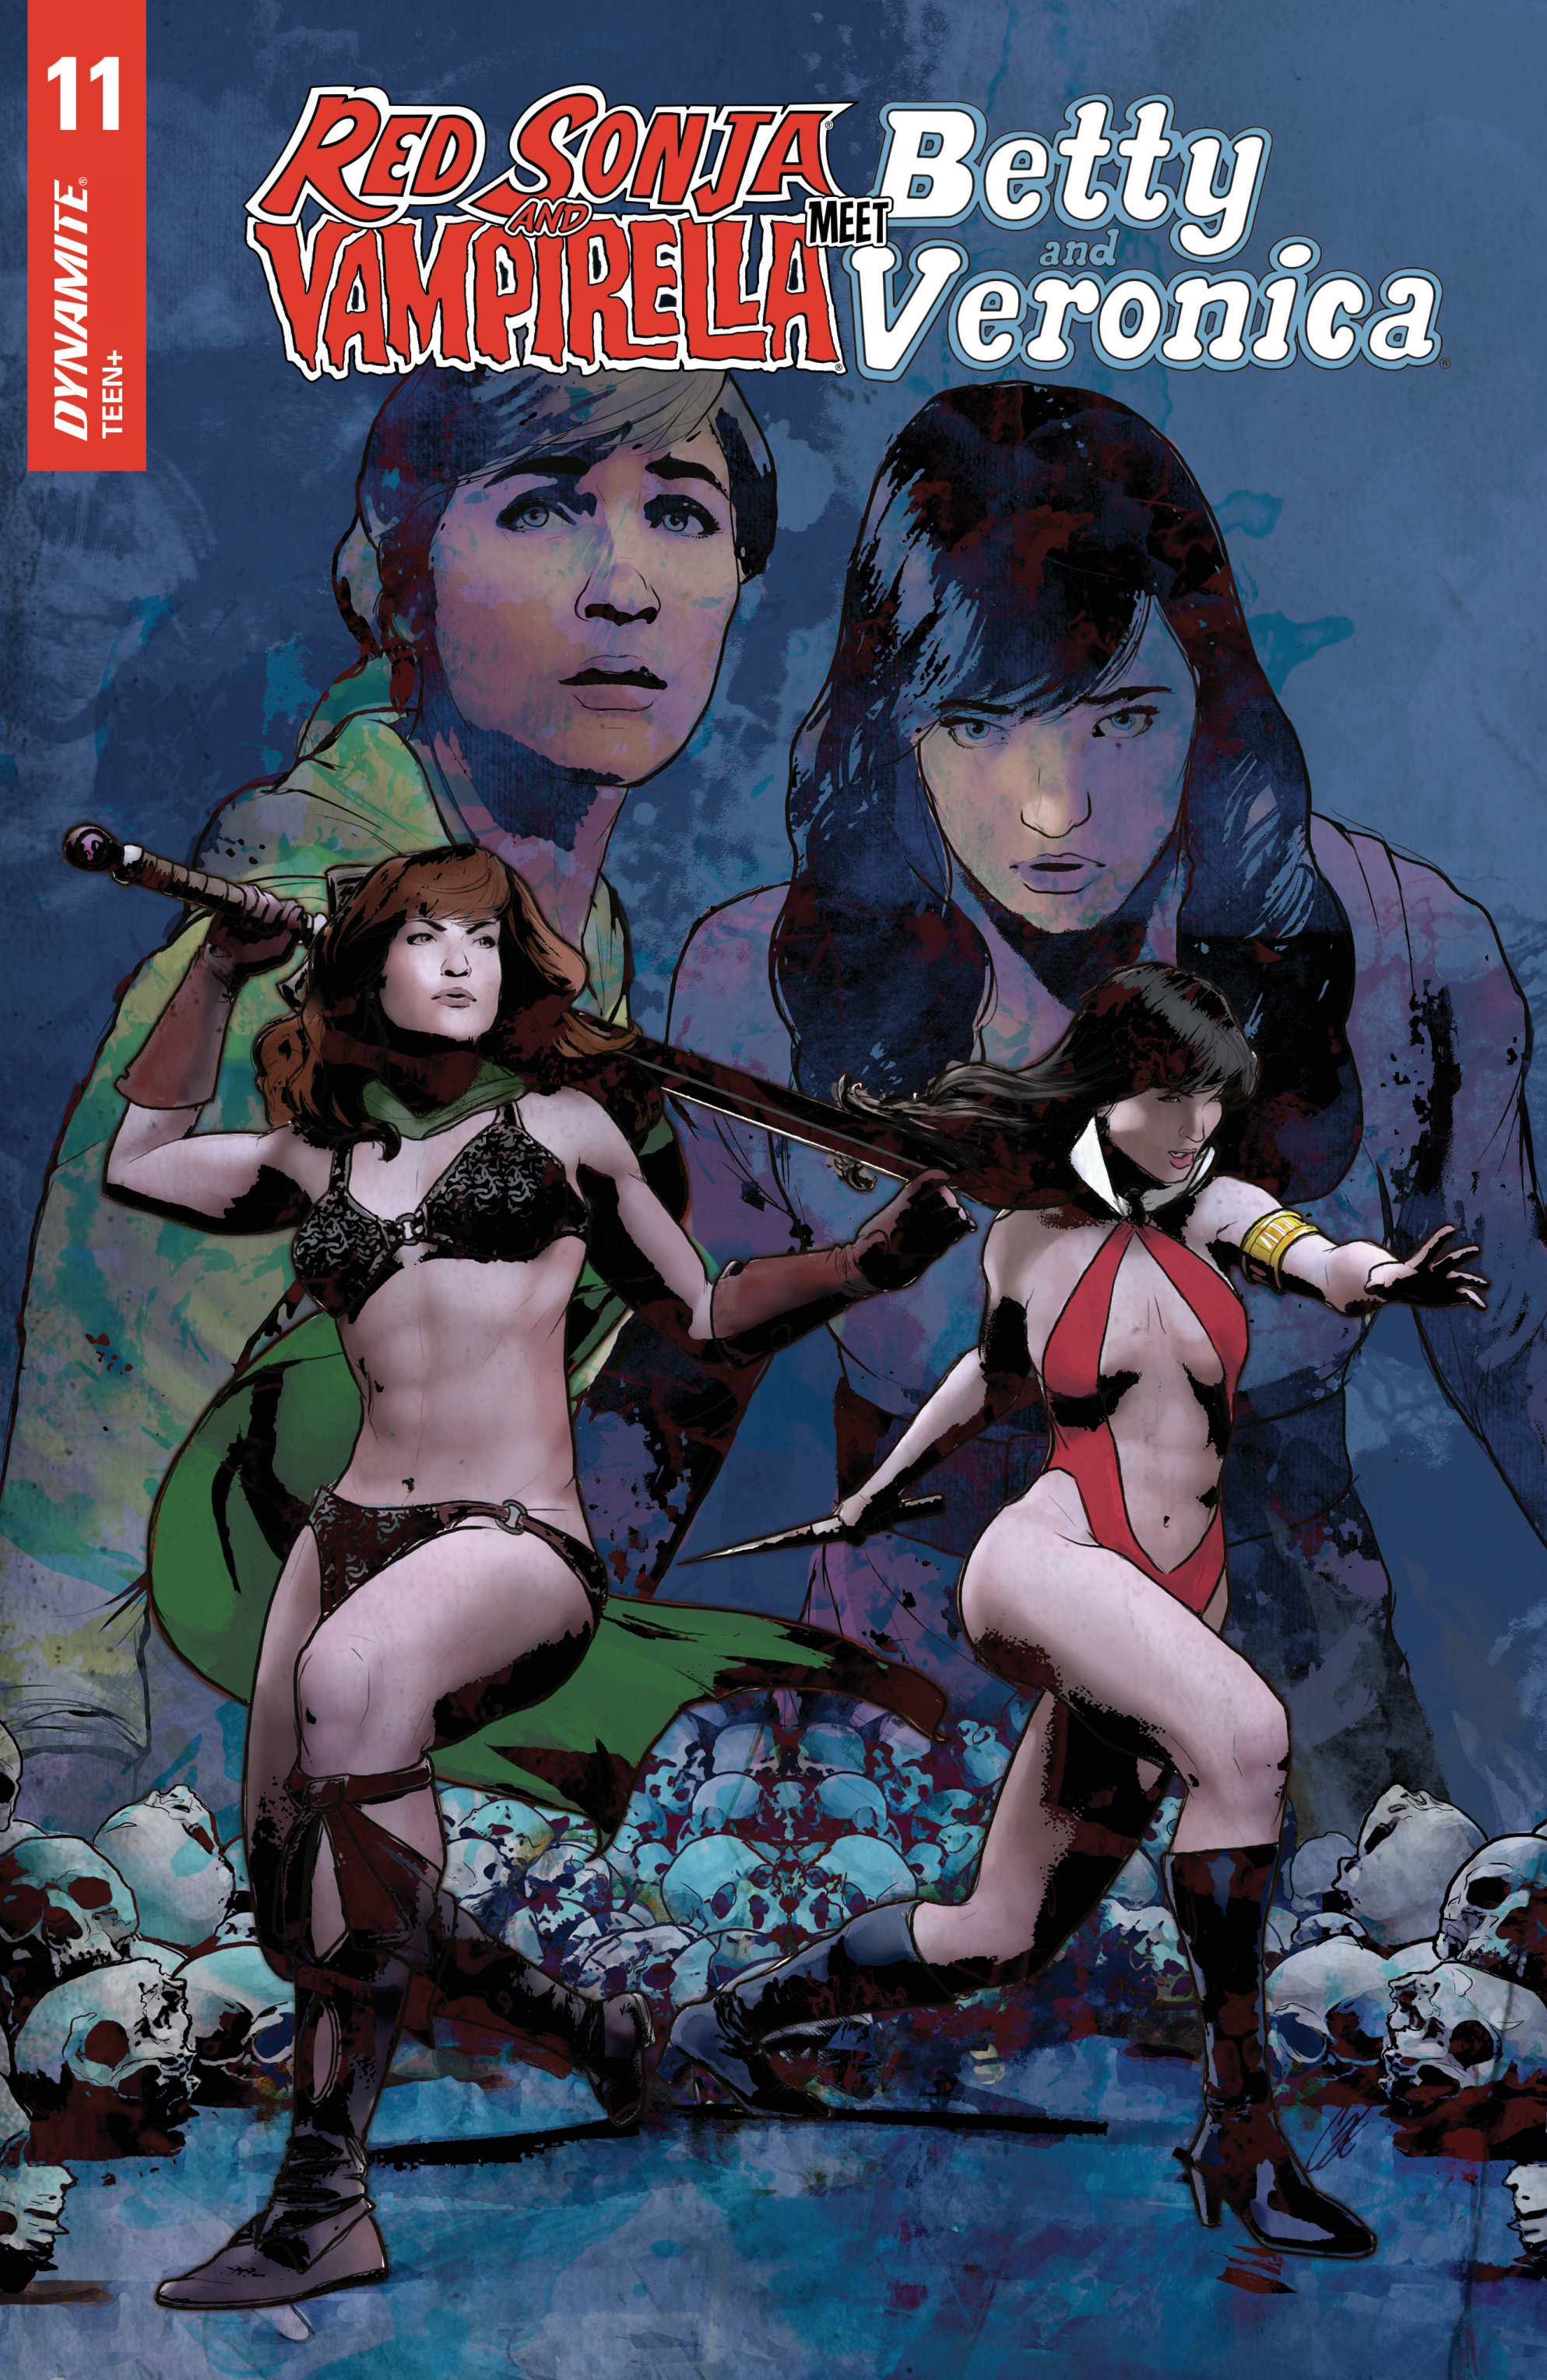 Read online Red Sonja and Vampirella Meet Betty and Veronica comic -  Issue #11 - 5